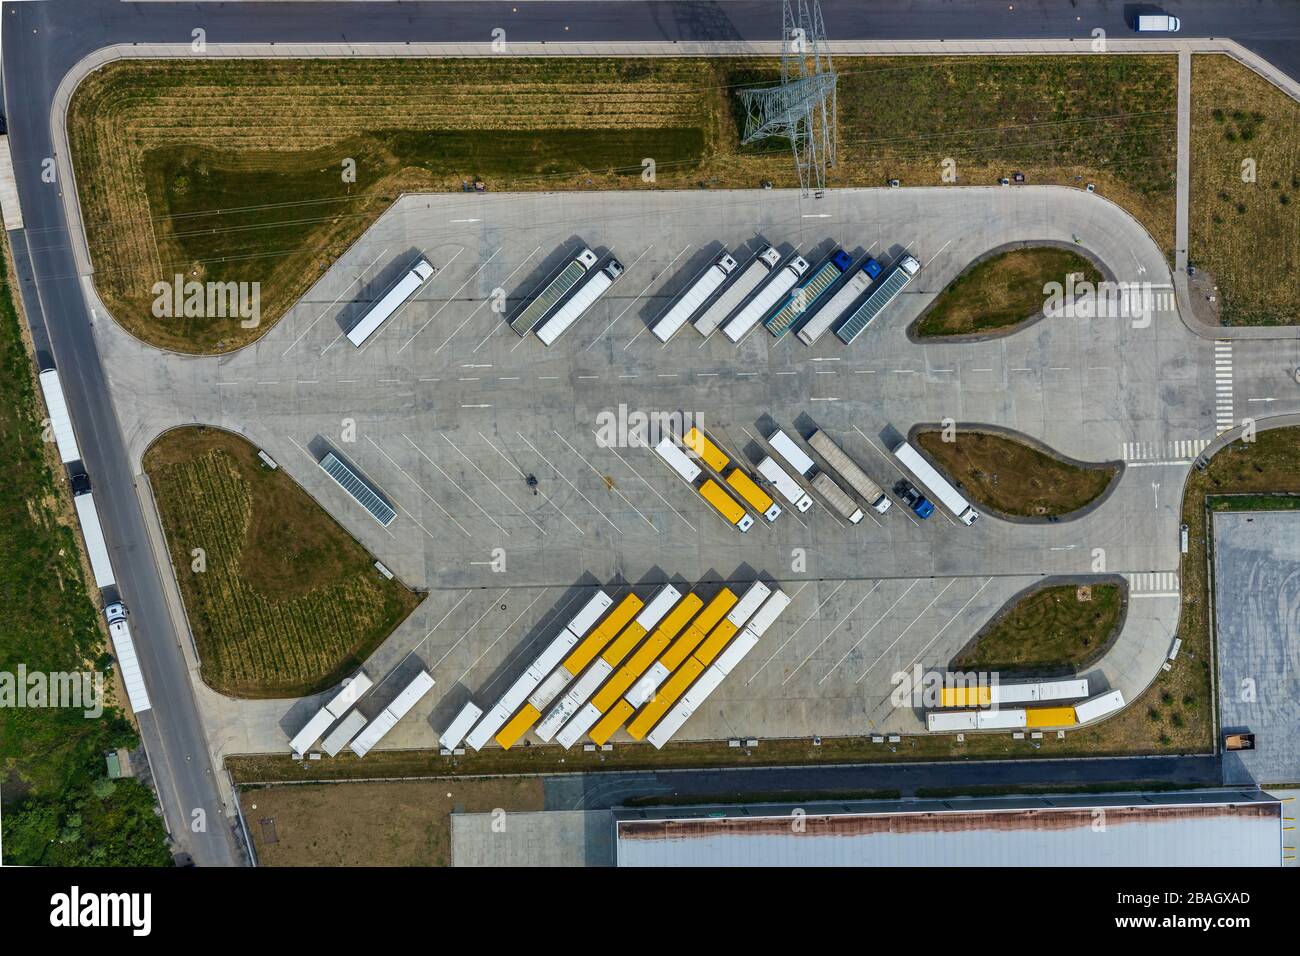 Truck Parking Lot High Resolution Stock Photography and Images - Alamy